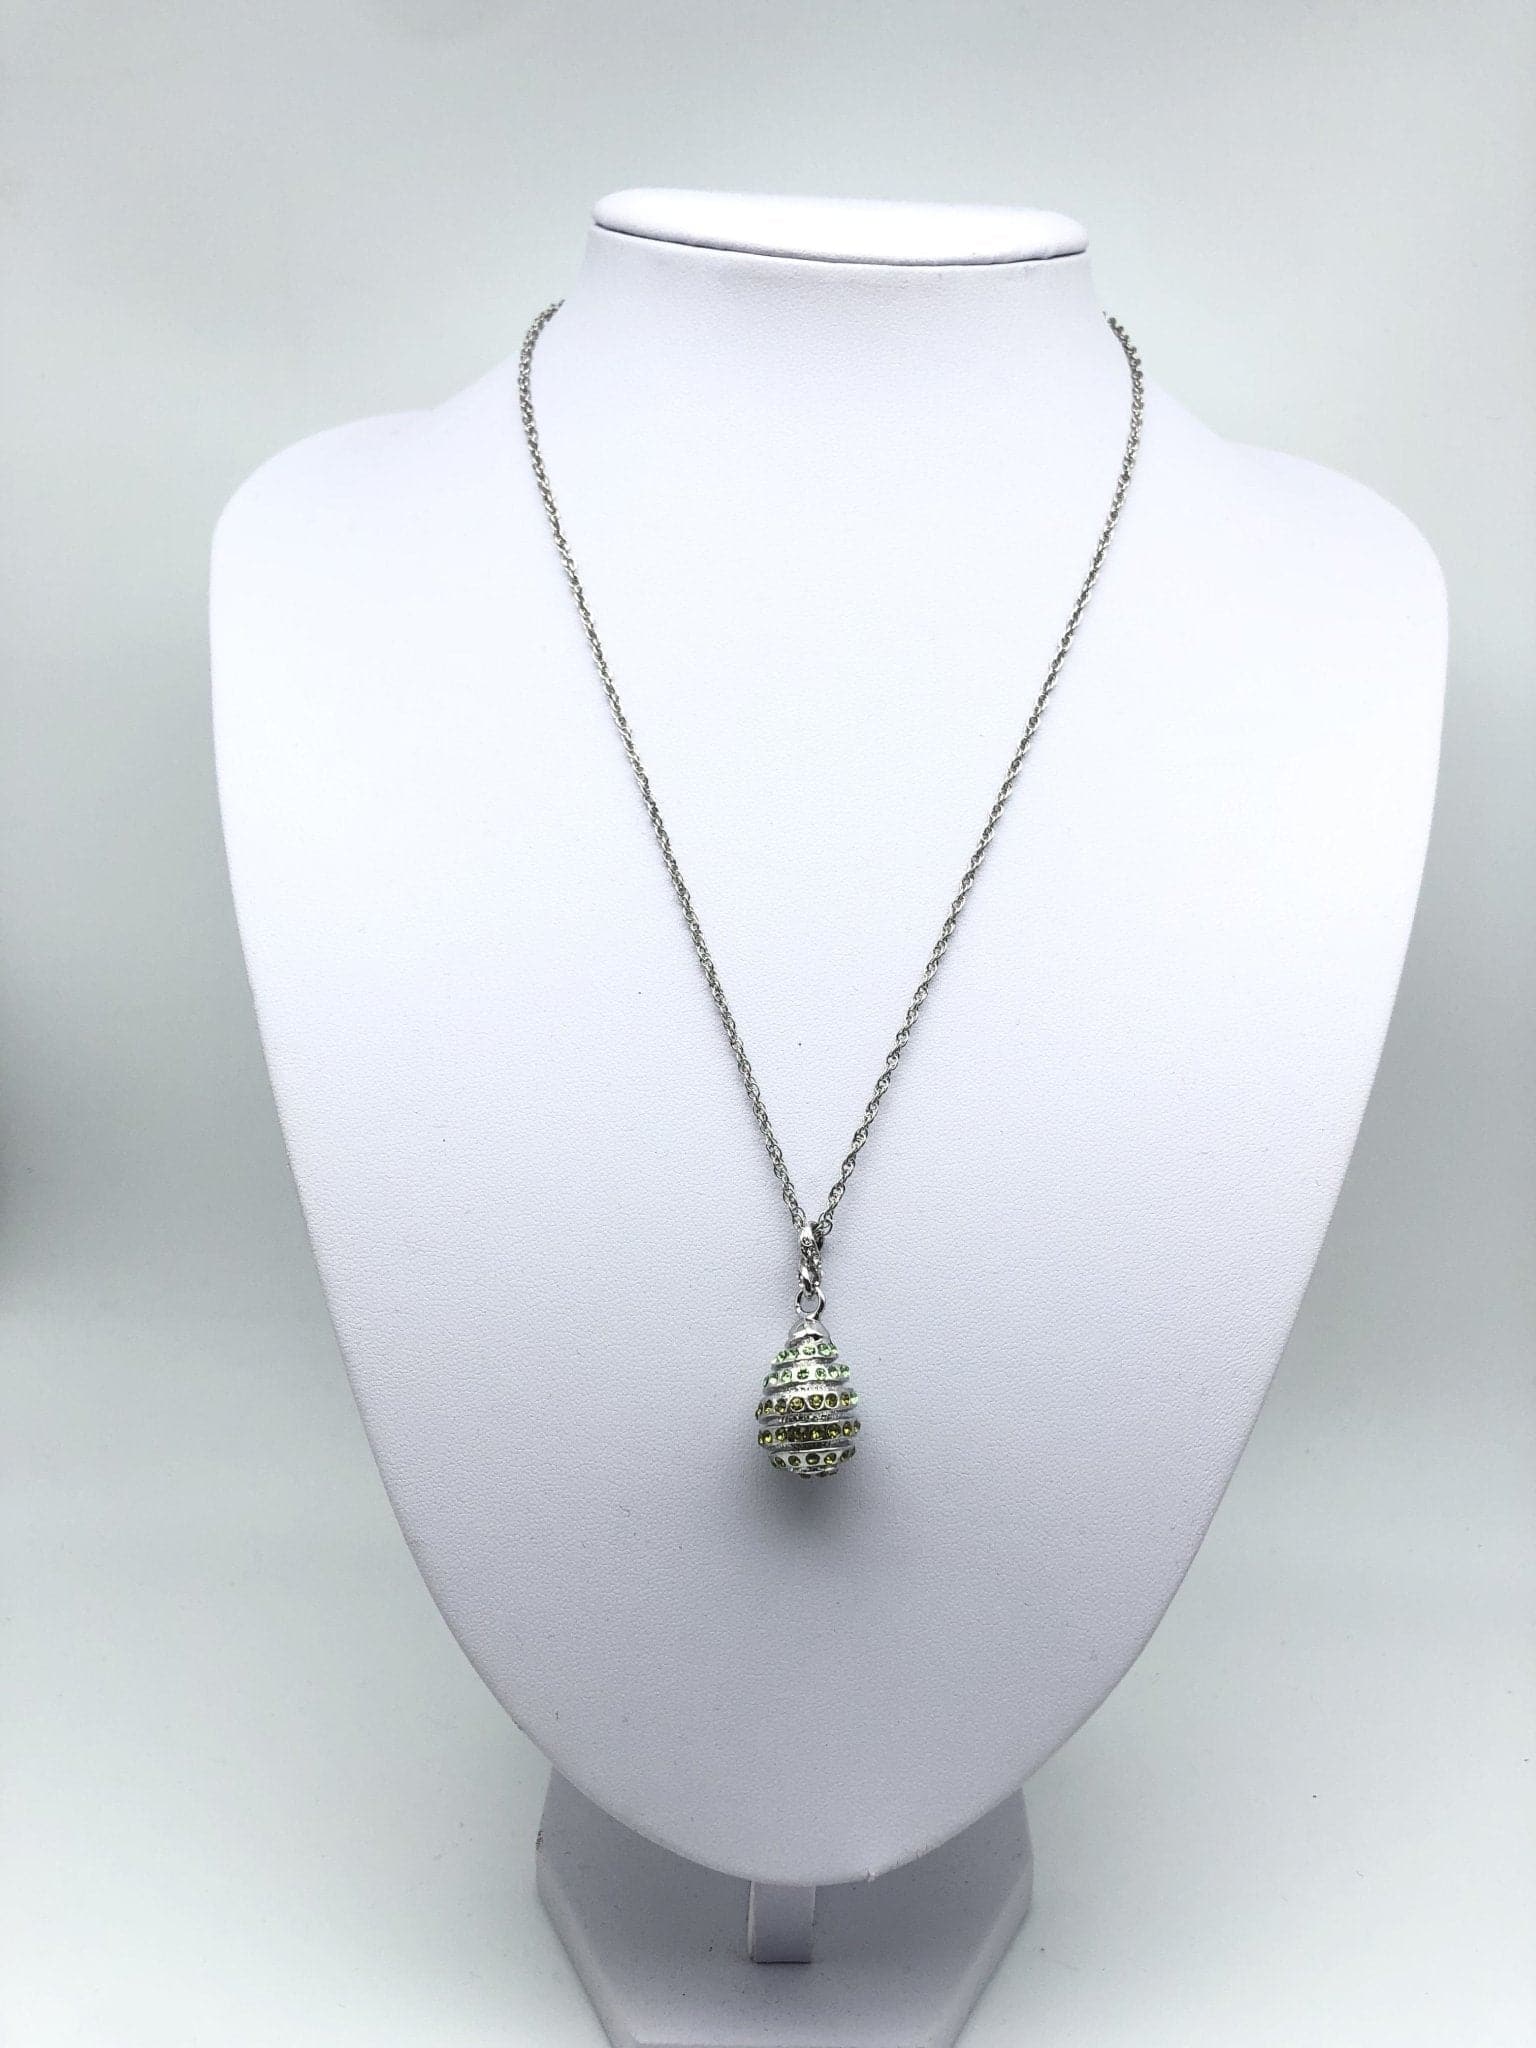 Silver Egg Pendant Necklace | Treasures of my HeART